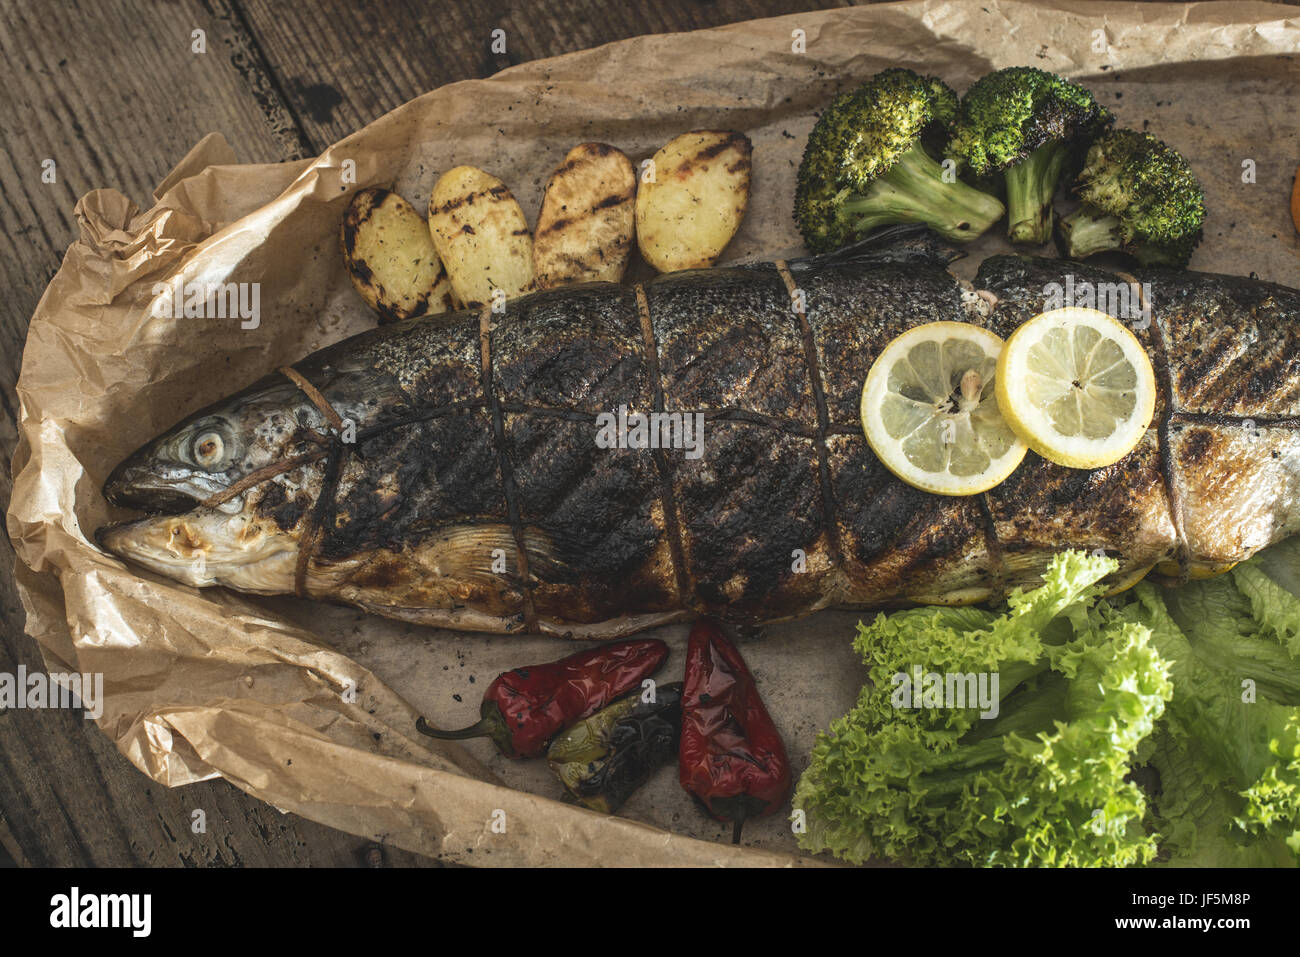 Roasted salmon and vegetables Stock Photo